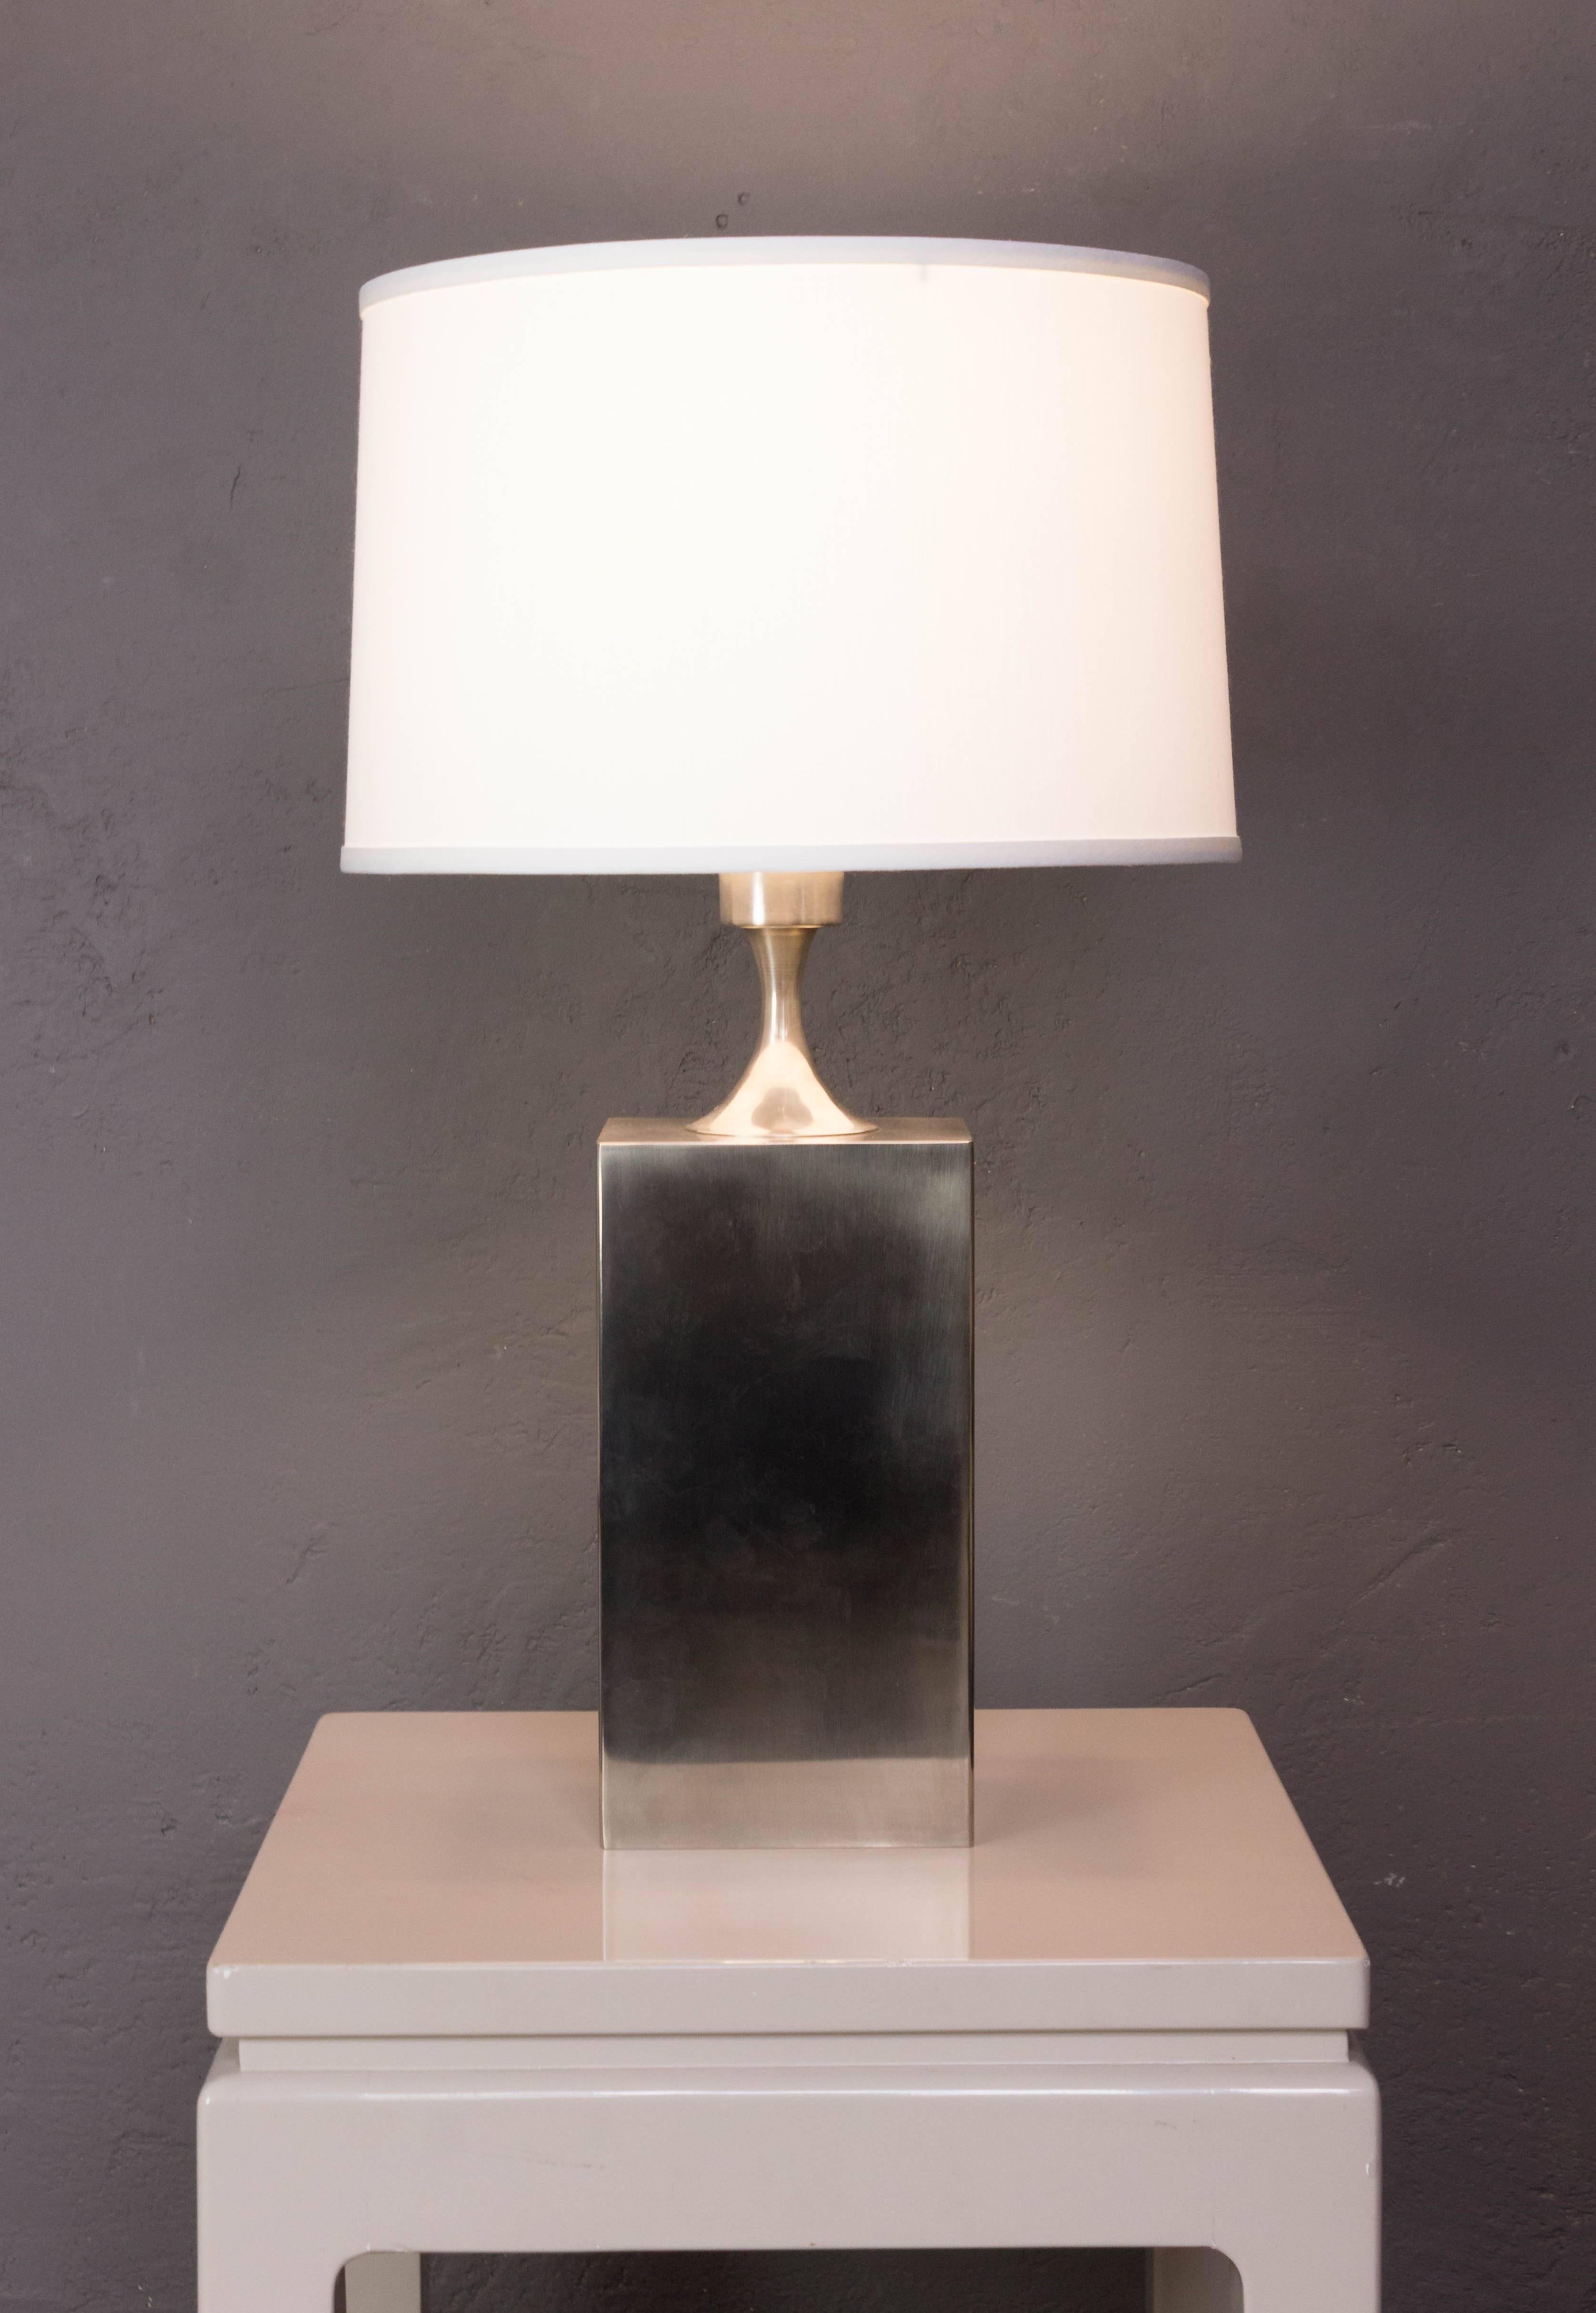 Polished steel lamp designed by Philippe Barbier (French 1970s). 